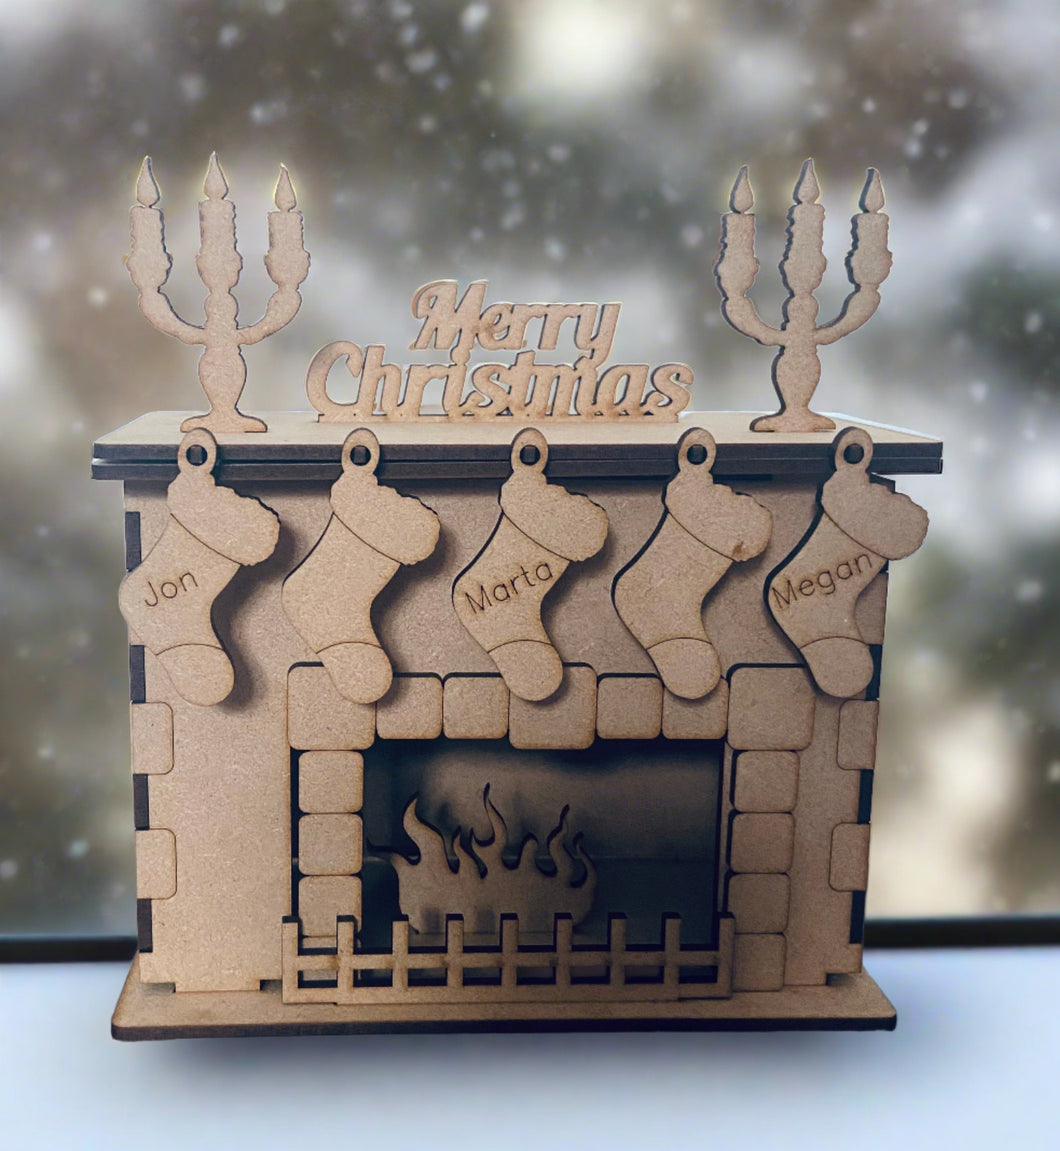 Wooden personalised freestanding fireplace with stocking - Laser LLama Designs Ltd